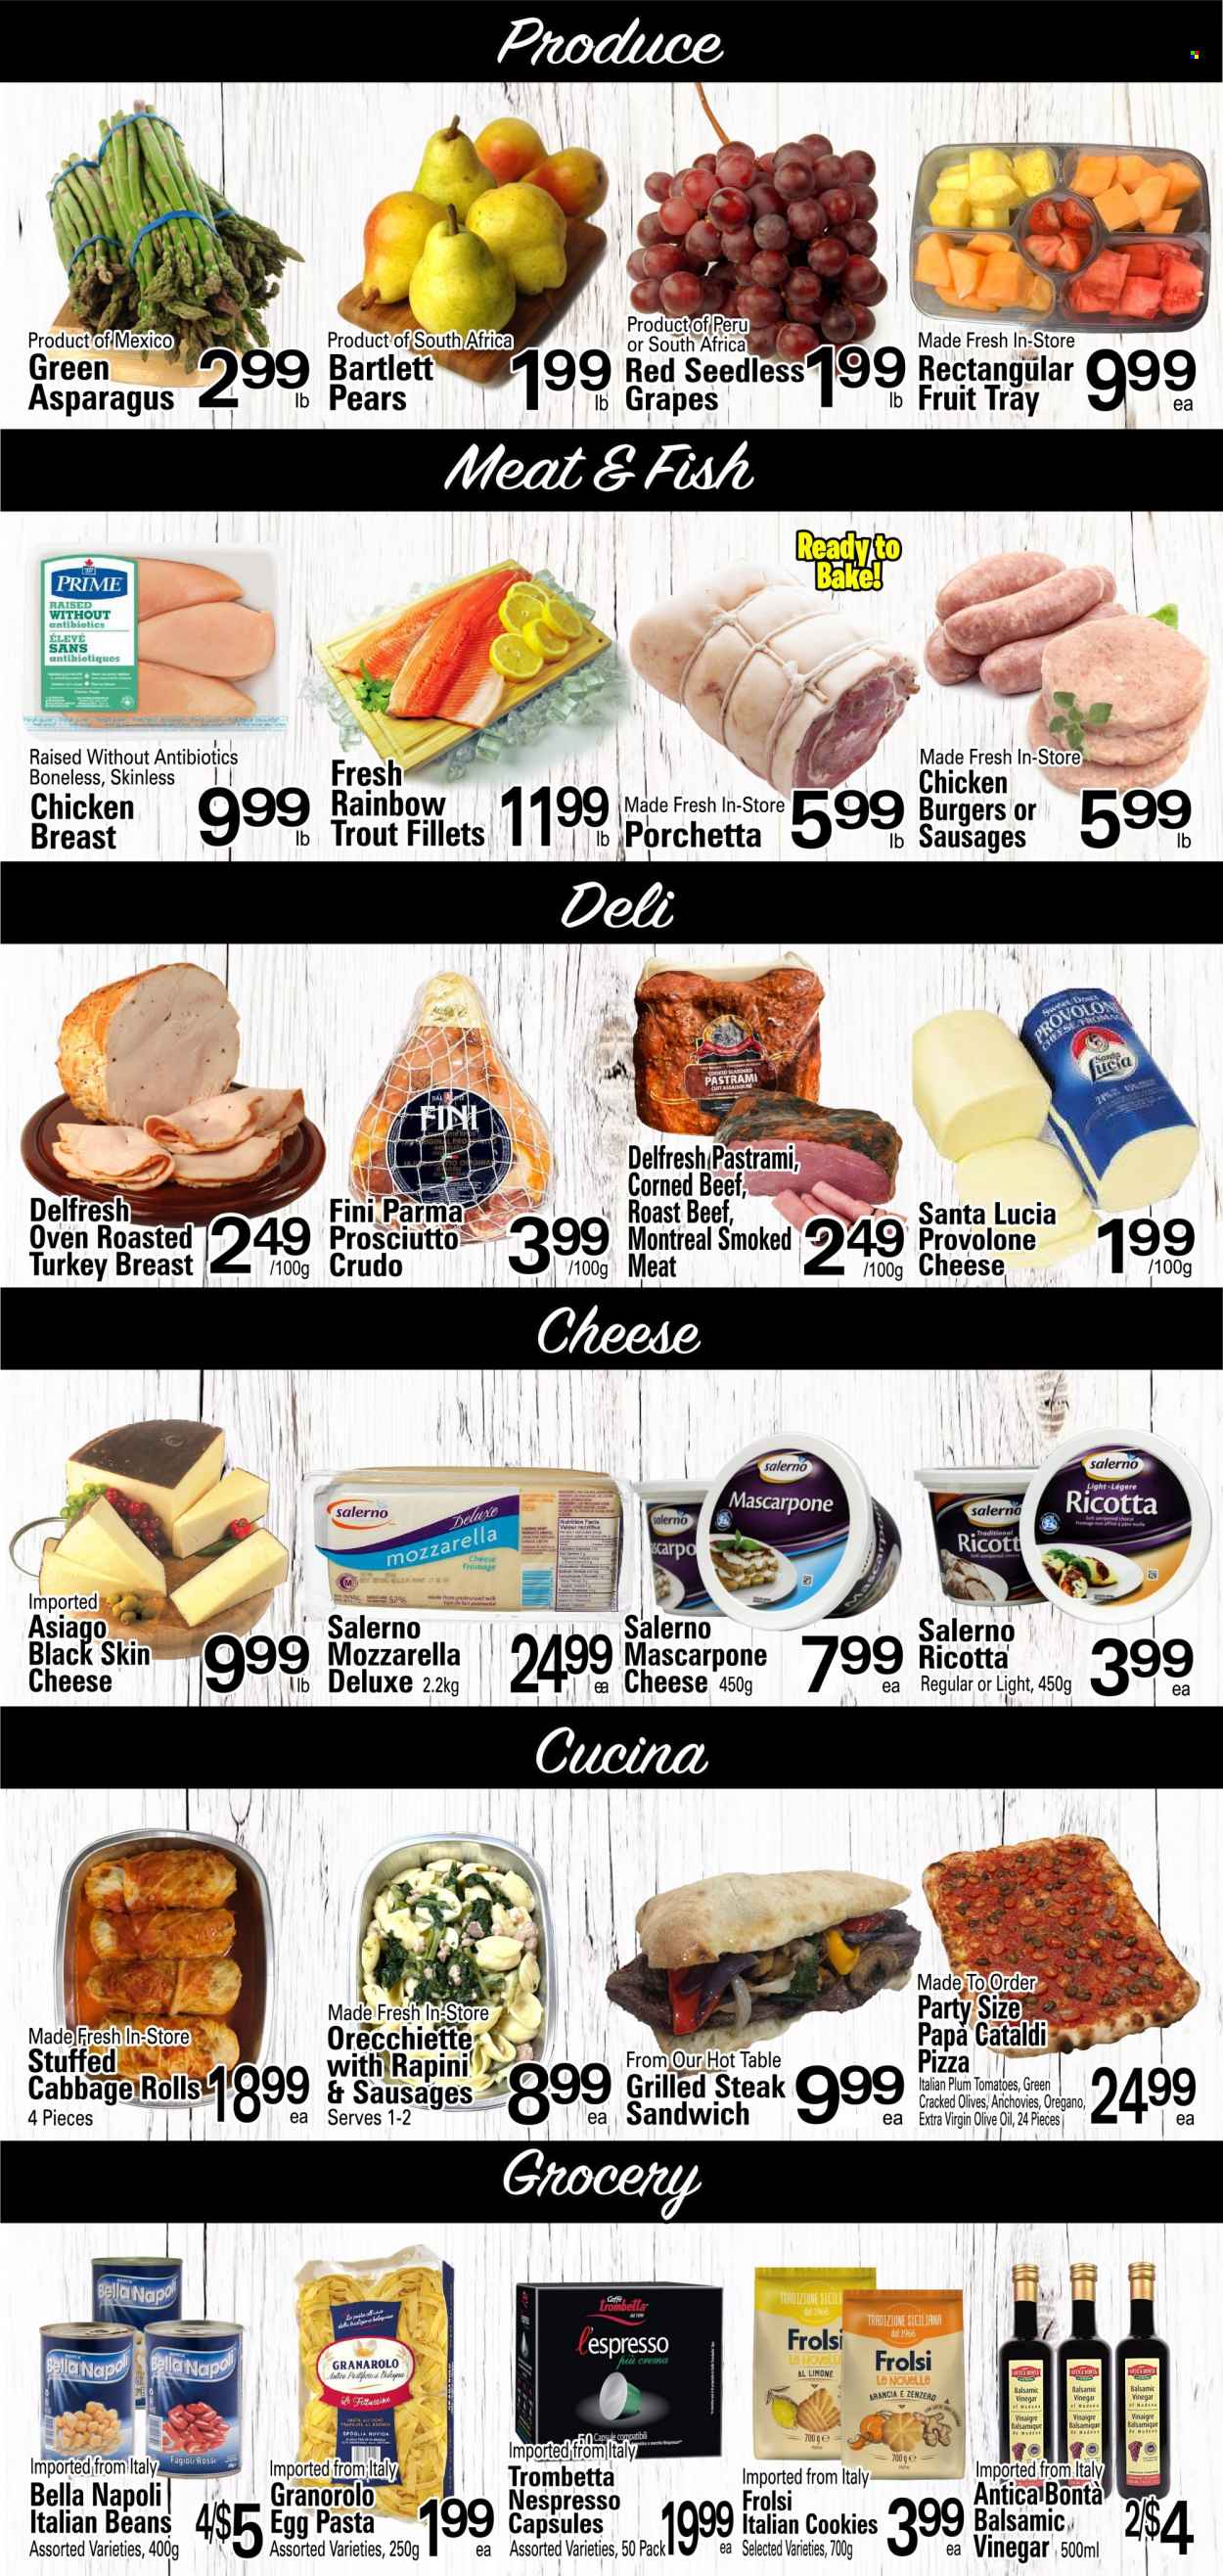 thumbnail - Cataldi Fresh Market Flyer - March 22, 2023 - March 28, 2023 - Sales products - asparagus, beans, Bella, cabbage, grapes, trout, fish, pizza, sandwich, hamburger, pasta, roast, prosciutto, pastrami, bologna sausage, corned beef, asiago, Provolone, milk, eggs, cookies, Santa, anchovies, balsamic vinegar, extra virgin olive oil, vinegar, olive oil, oil, Nespresso, chicken, turkey, beef meat, steak, roast beef, Sure, mascarpone, ricotta, olives. Page 2.